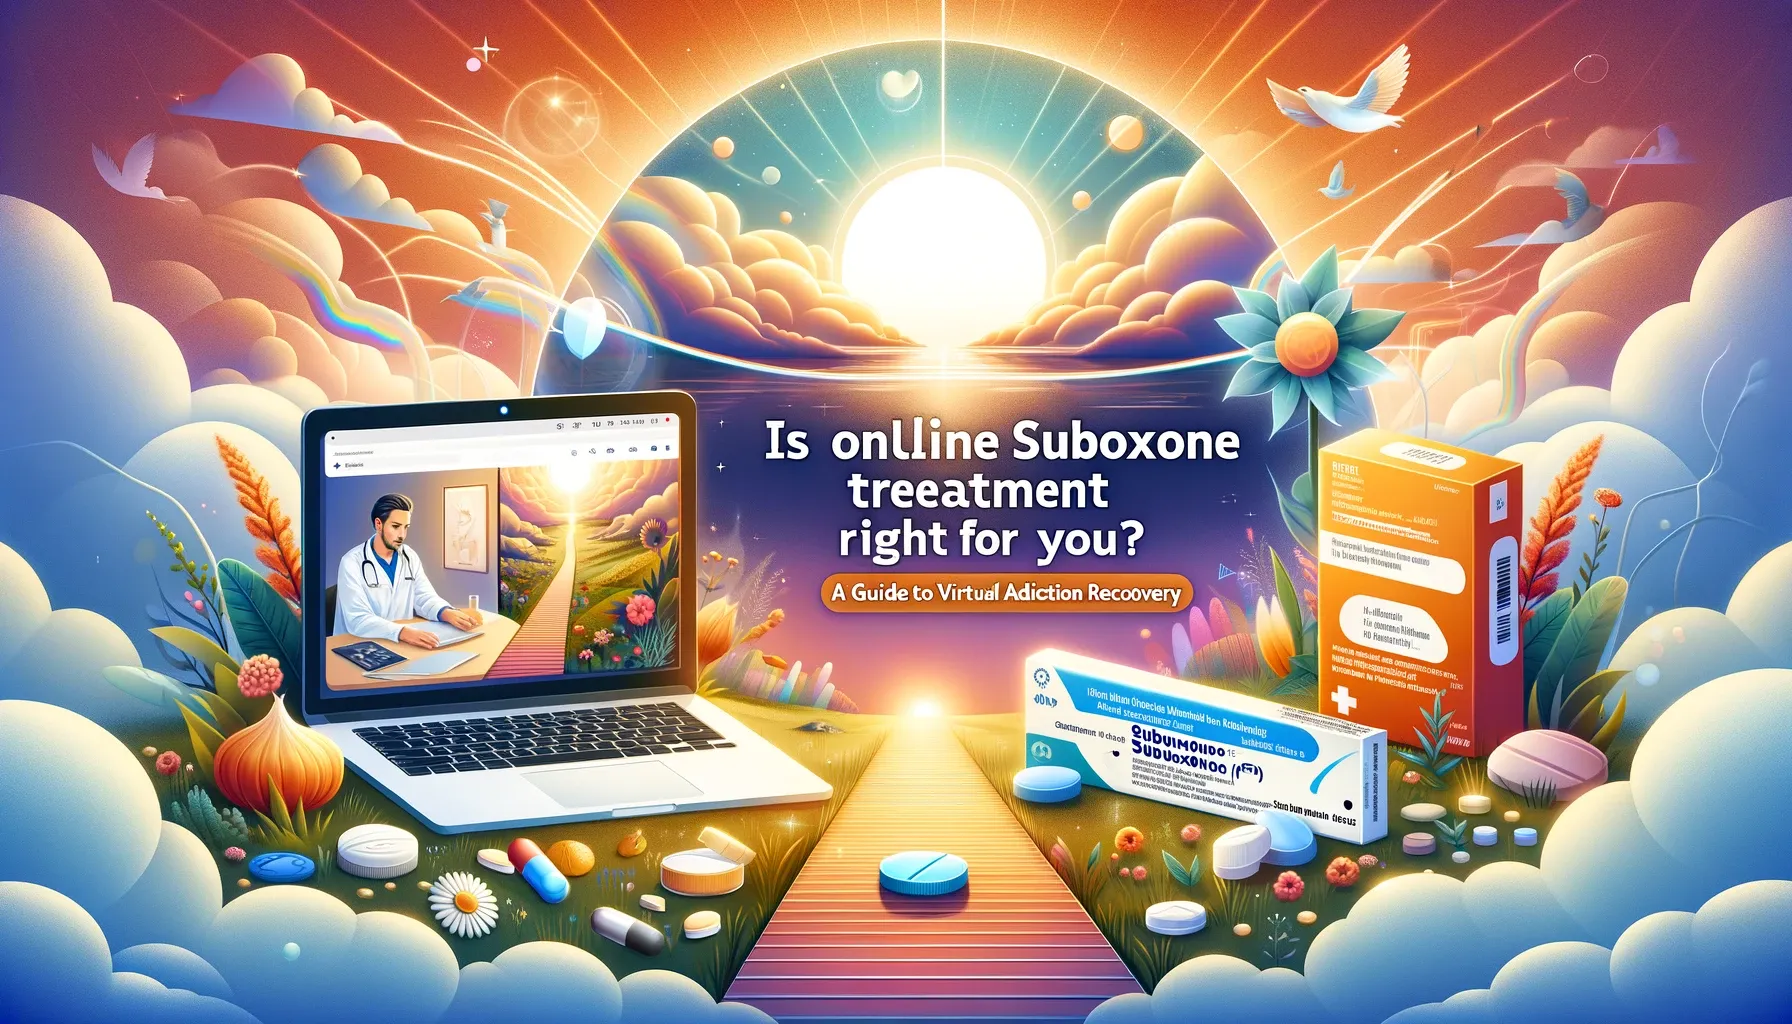 Is Online Suboxone Treatment Right for You? A Guide to Virtual Addiction Recovery